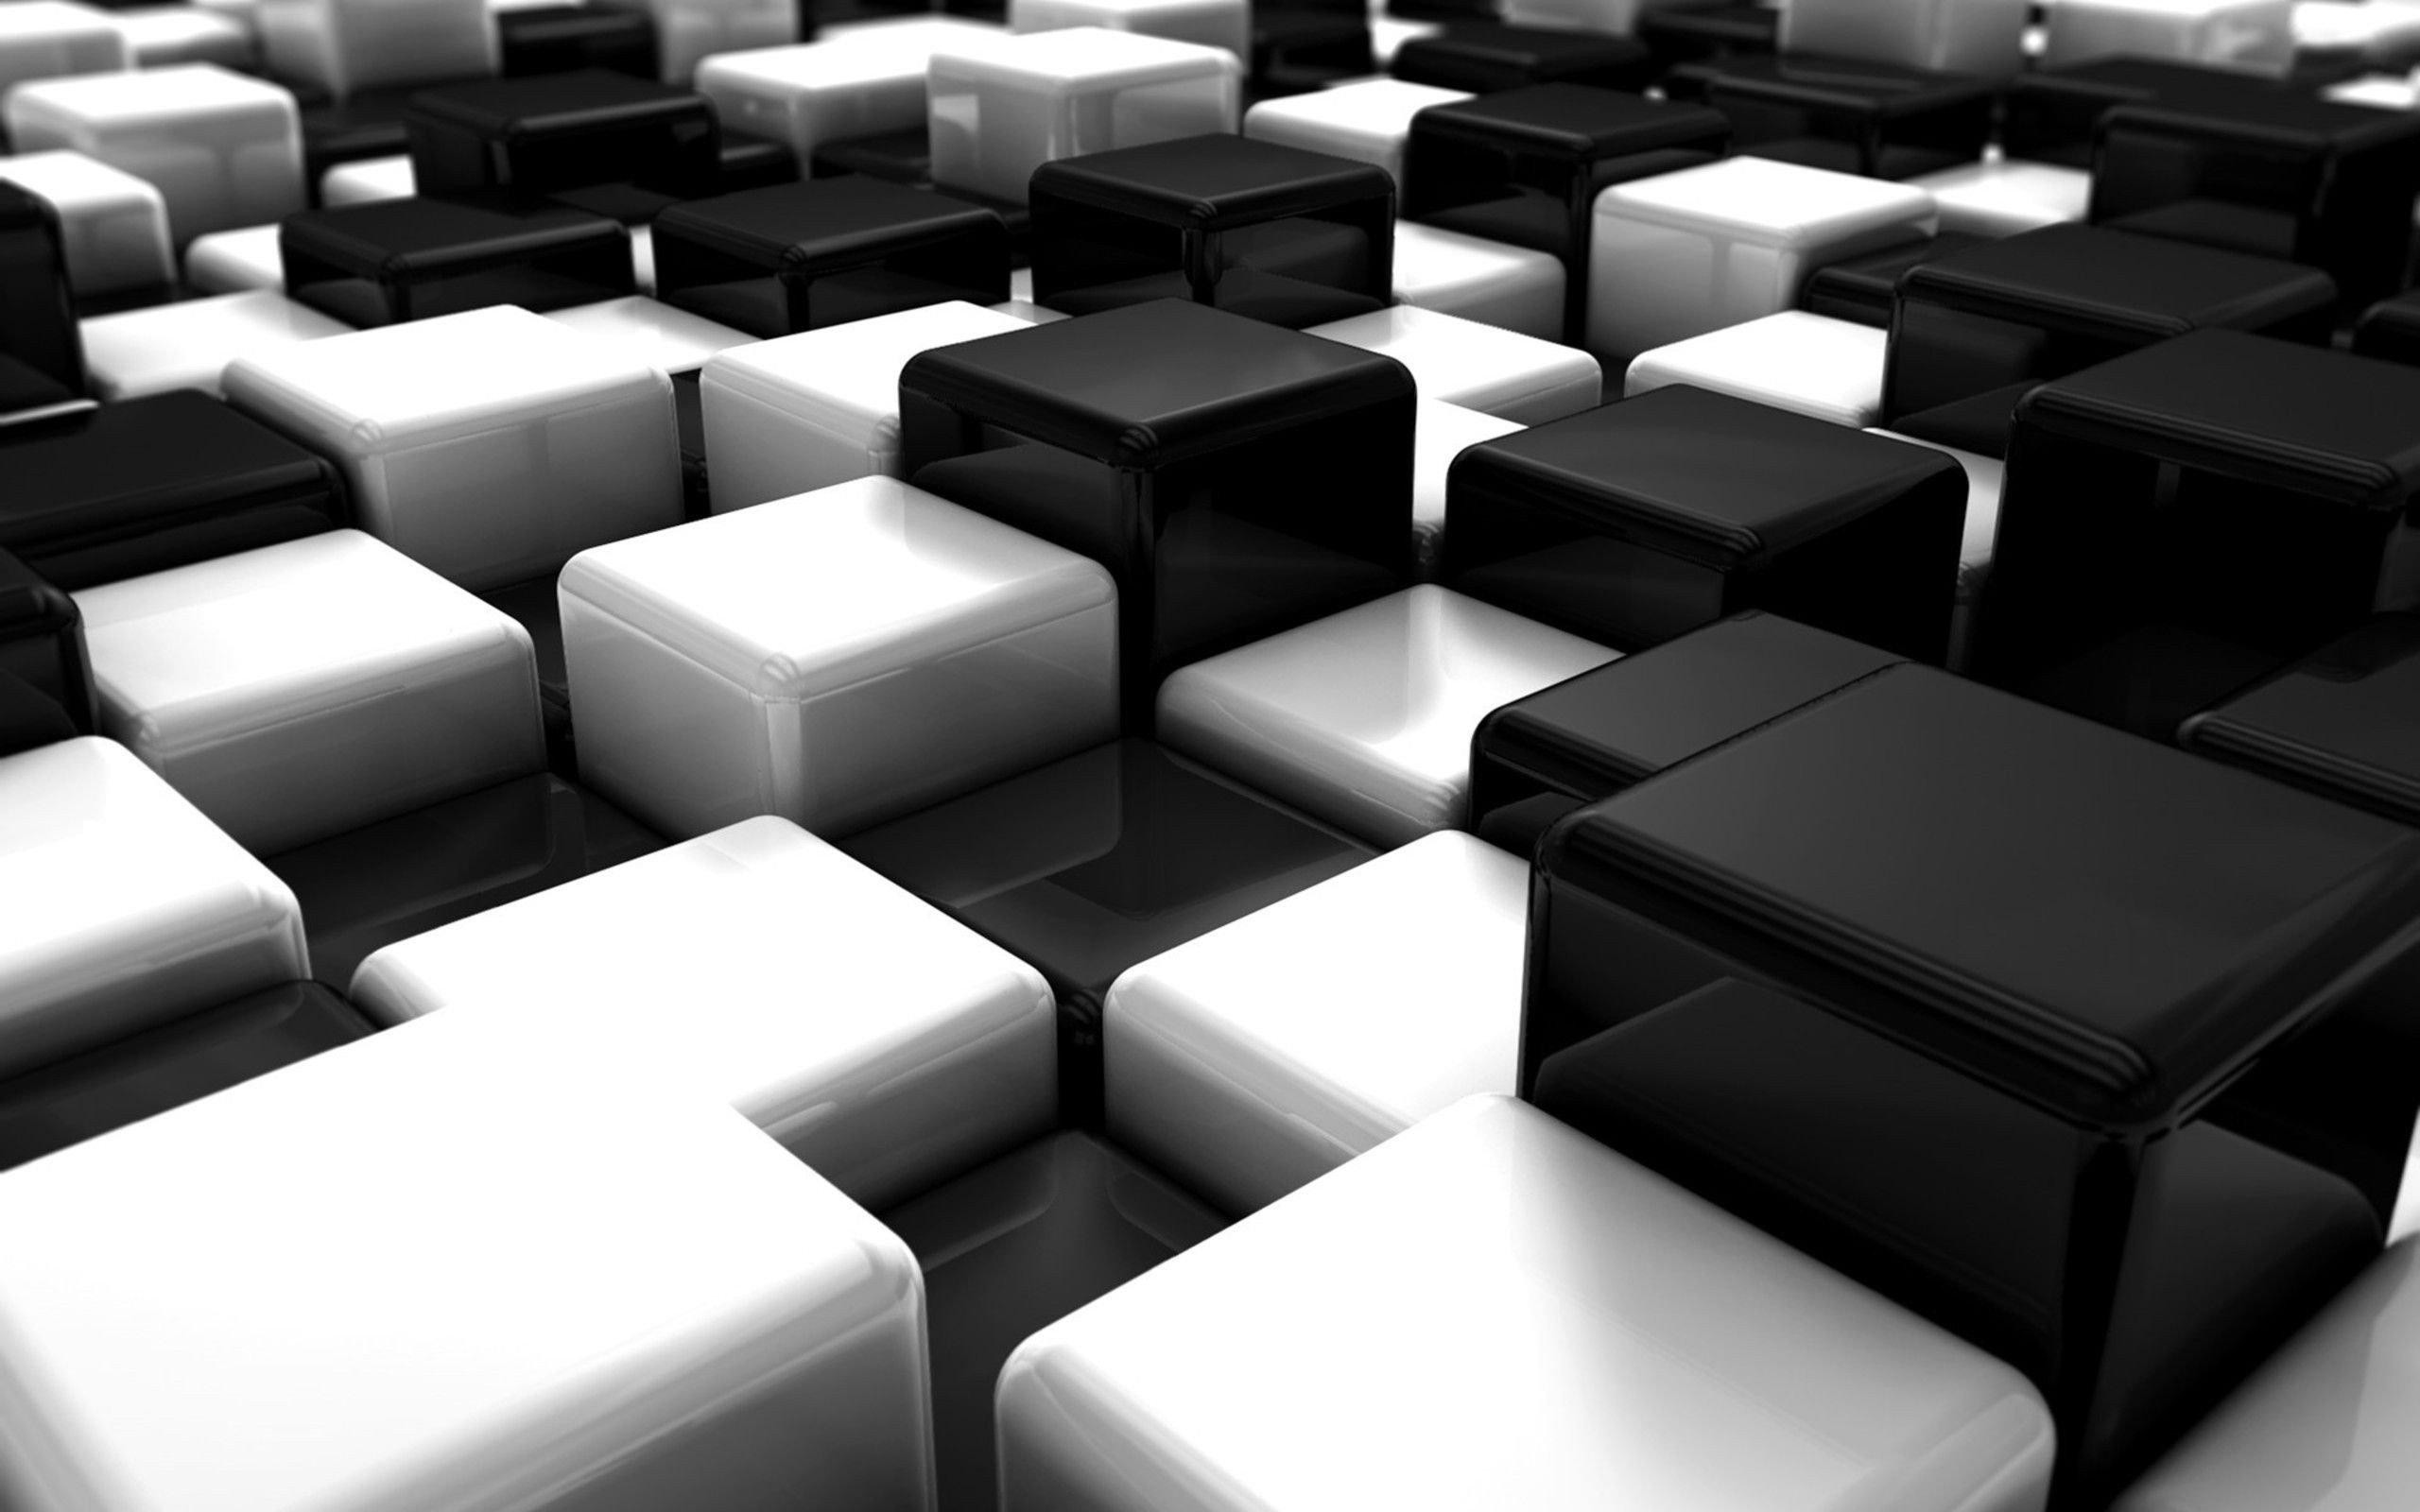 Awesome abstract black white blocks cubes digital art hd resolution wallpaper